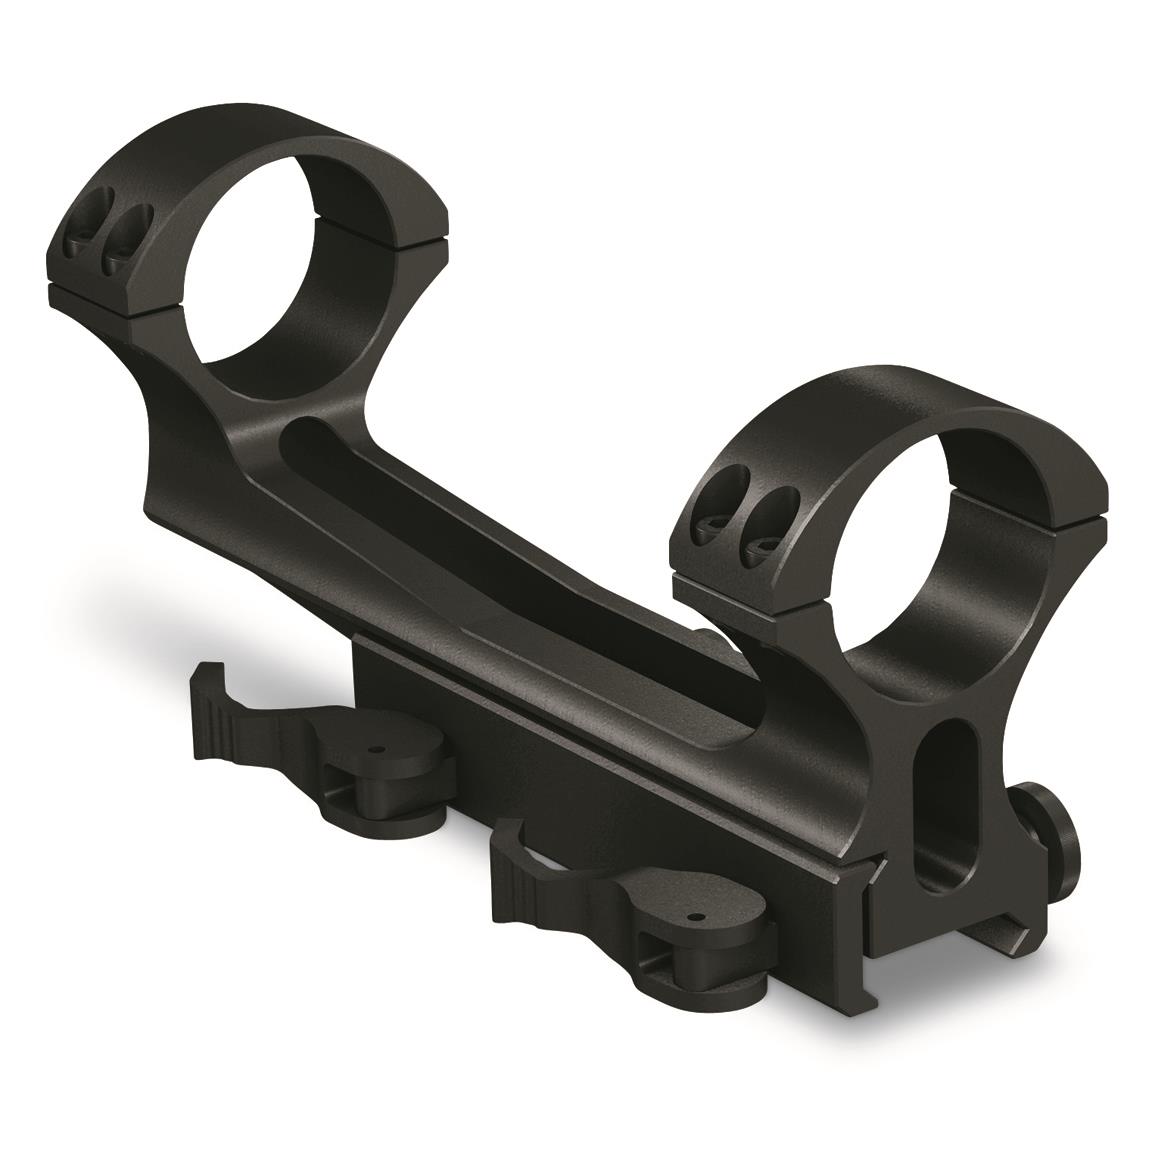 Structureel essay ritme ATN Dual Ring Cantilever QD, 30mm Rifle Scope Mount - 708705, Scope Rings &  Mounts at Sportsman's Guide